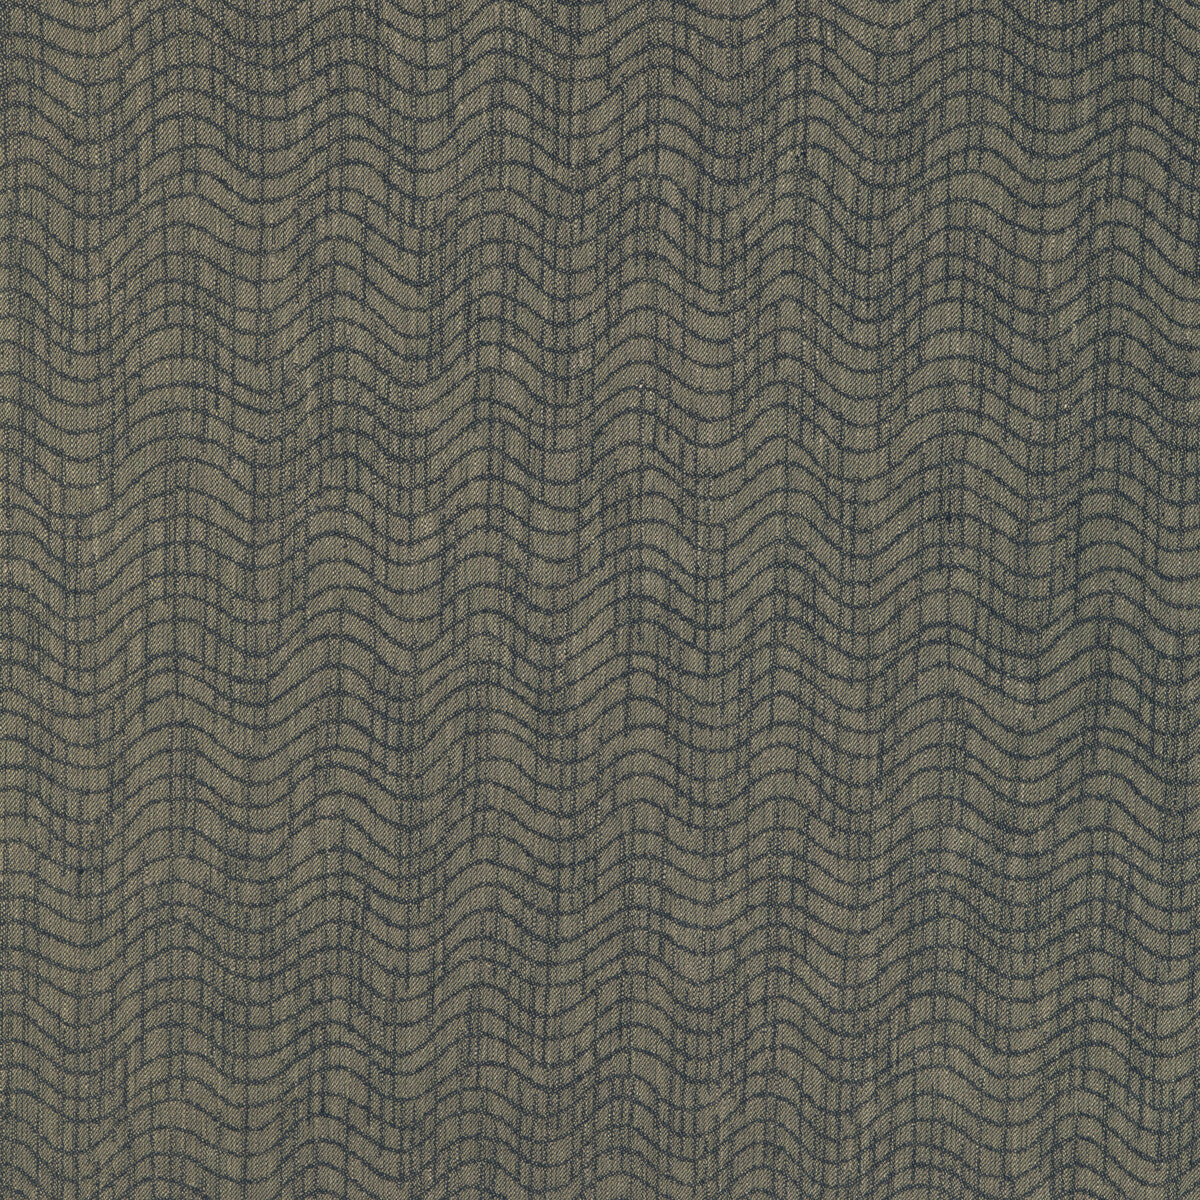 Dadami fabric in soot color - pattern GWF-3801.21.0 - by Lee Jofa Modern in the Kelly Wearstler VIII collection